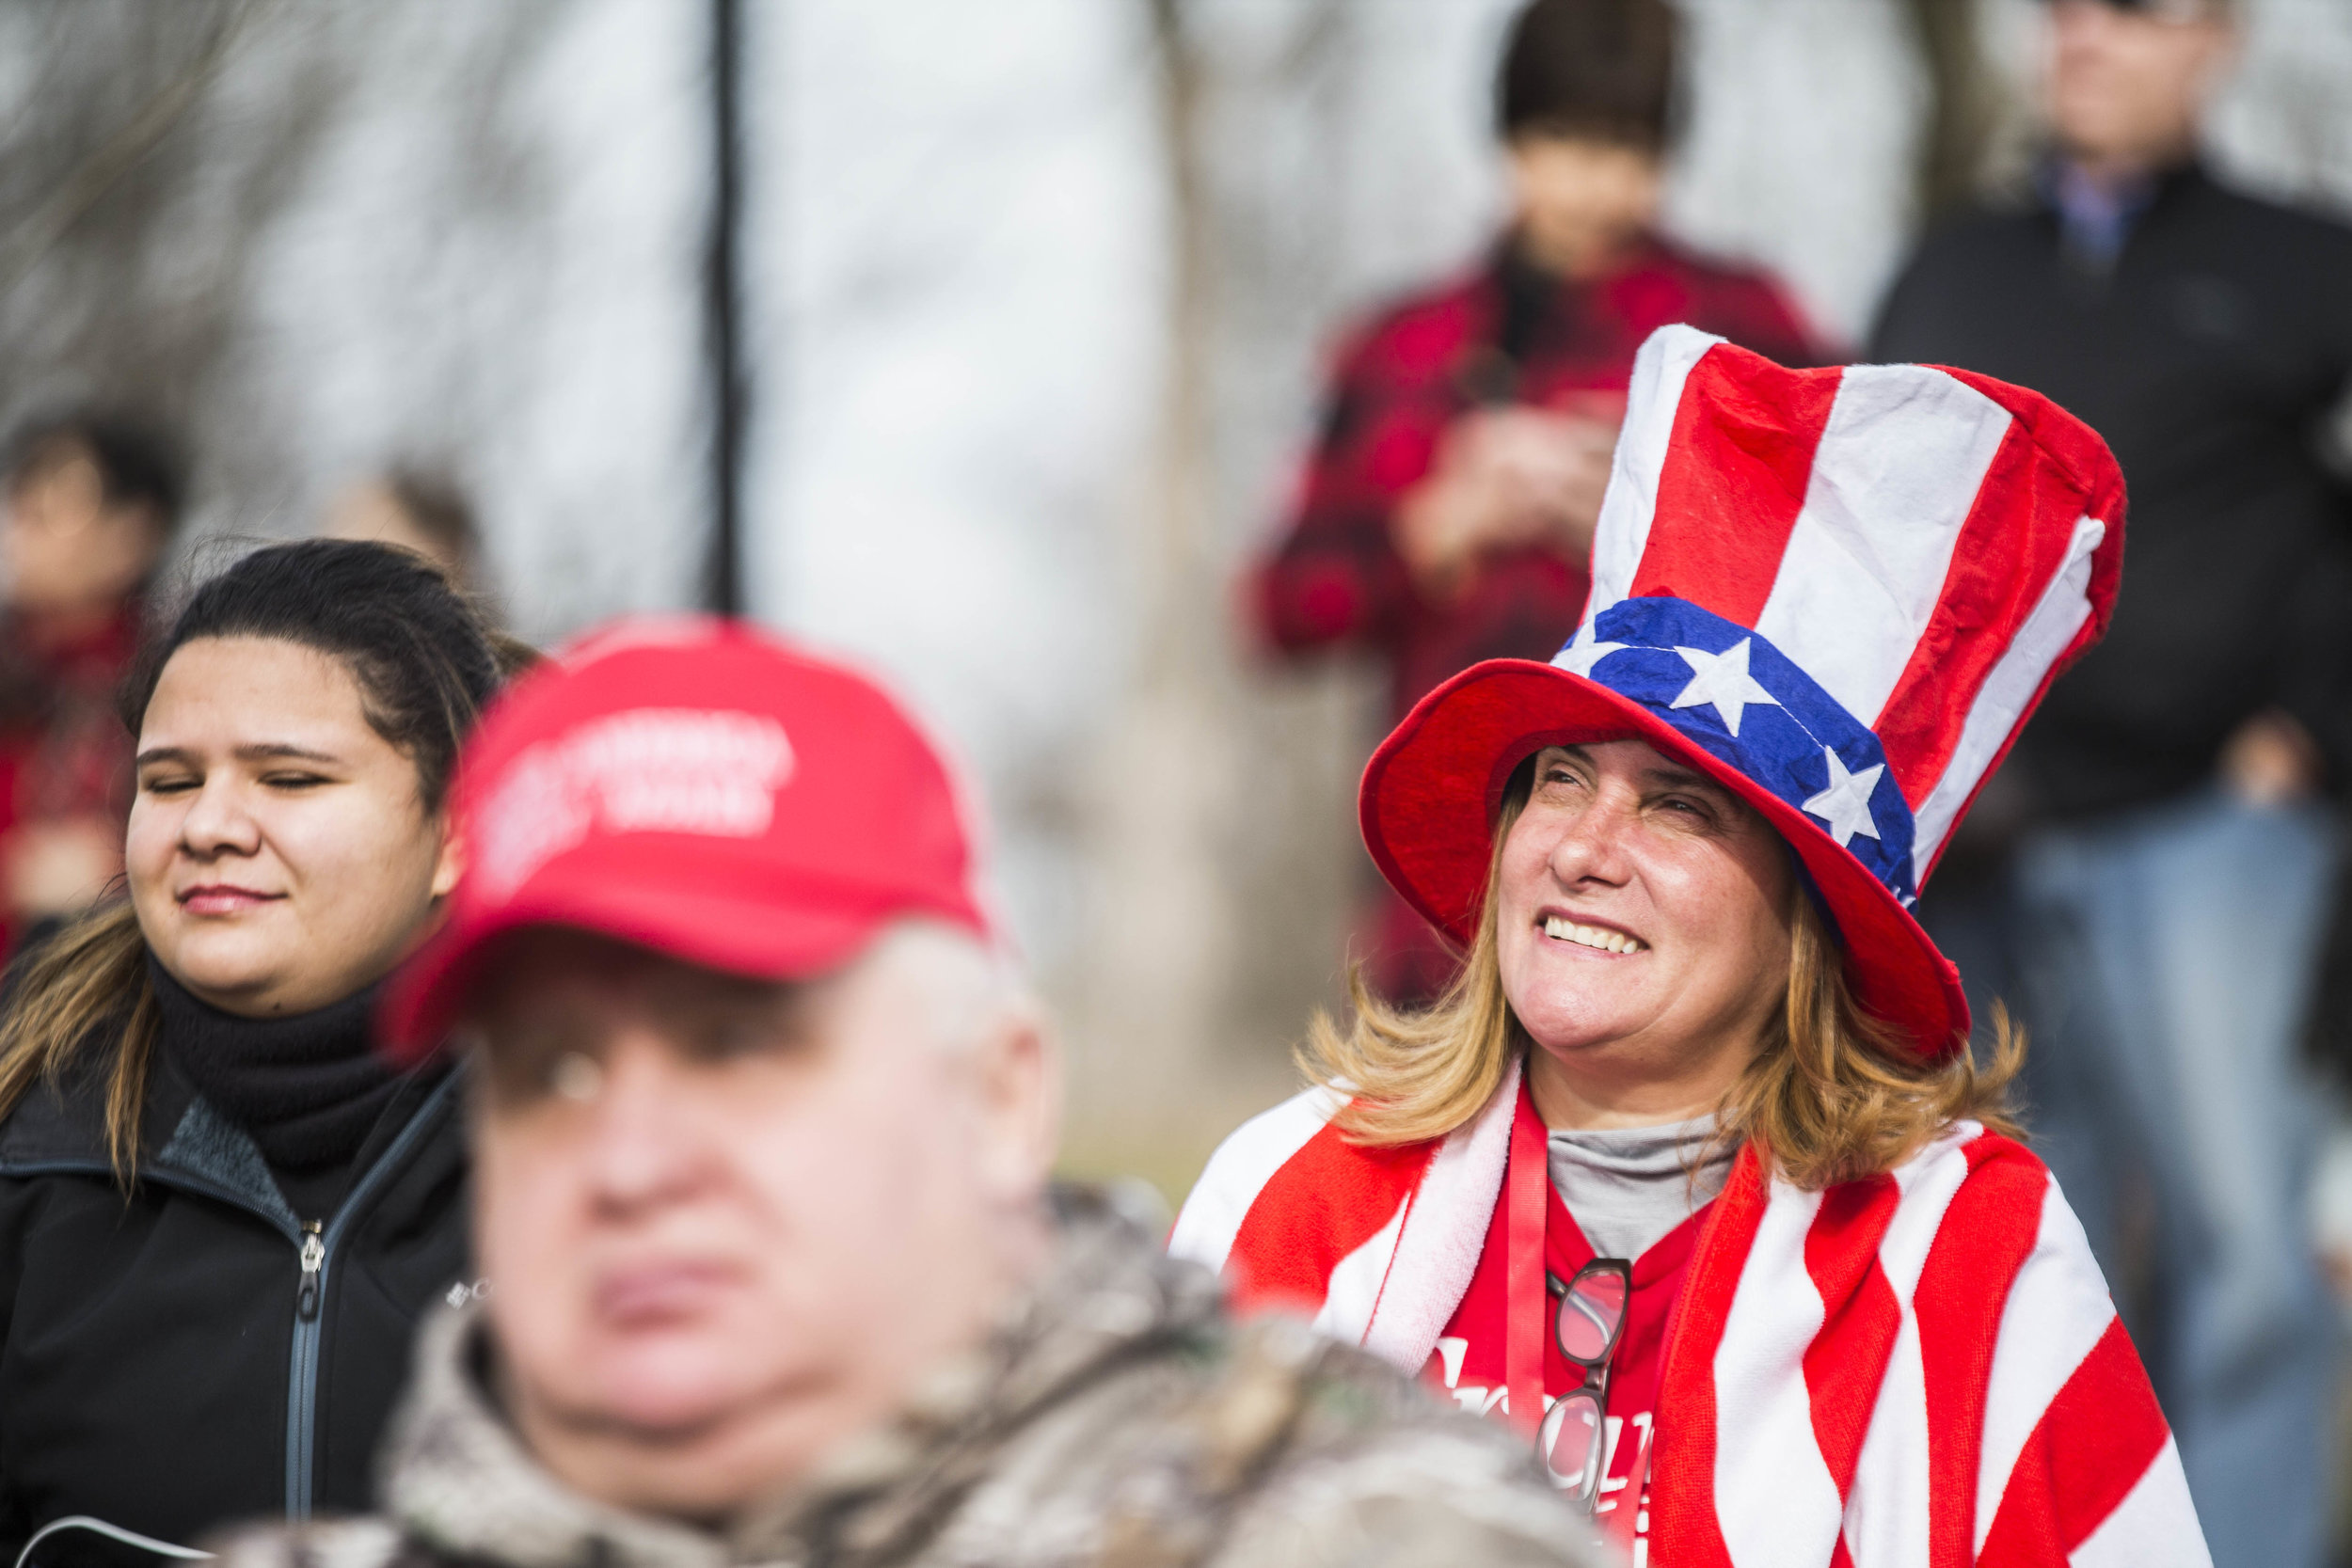  A woman cheers at Trump celebratory concert at Lincoln Memorial on January 19, 2017 